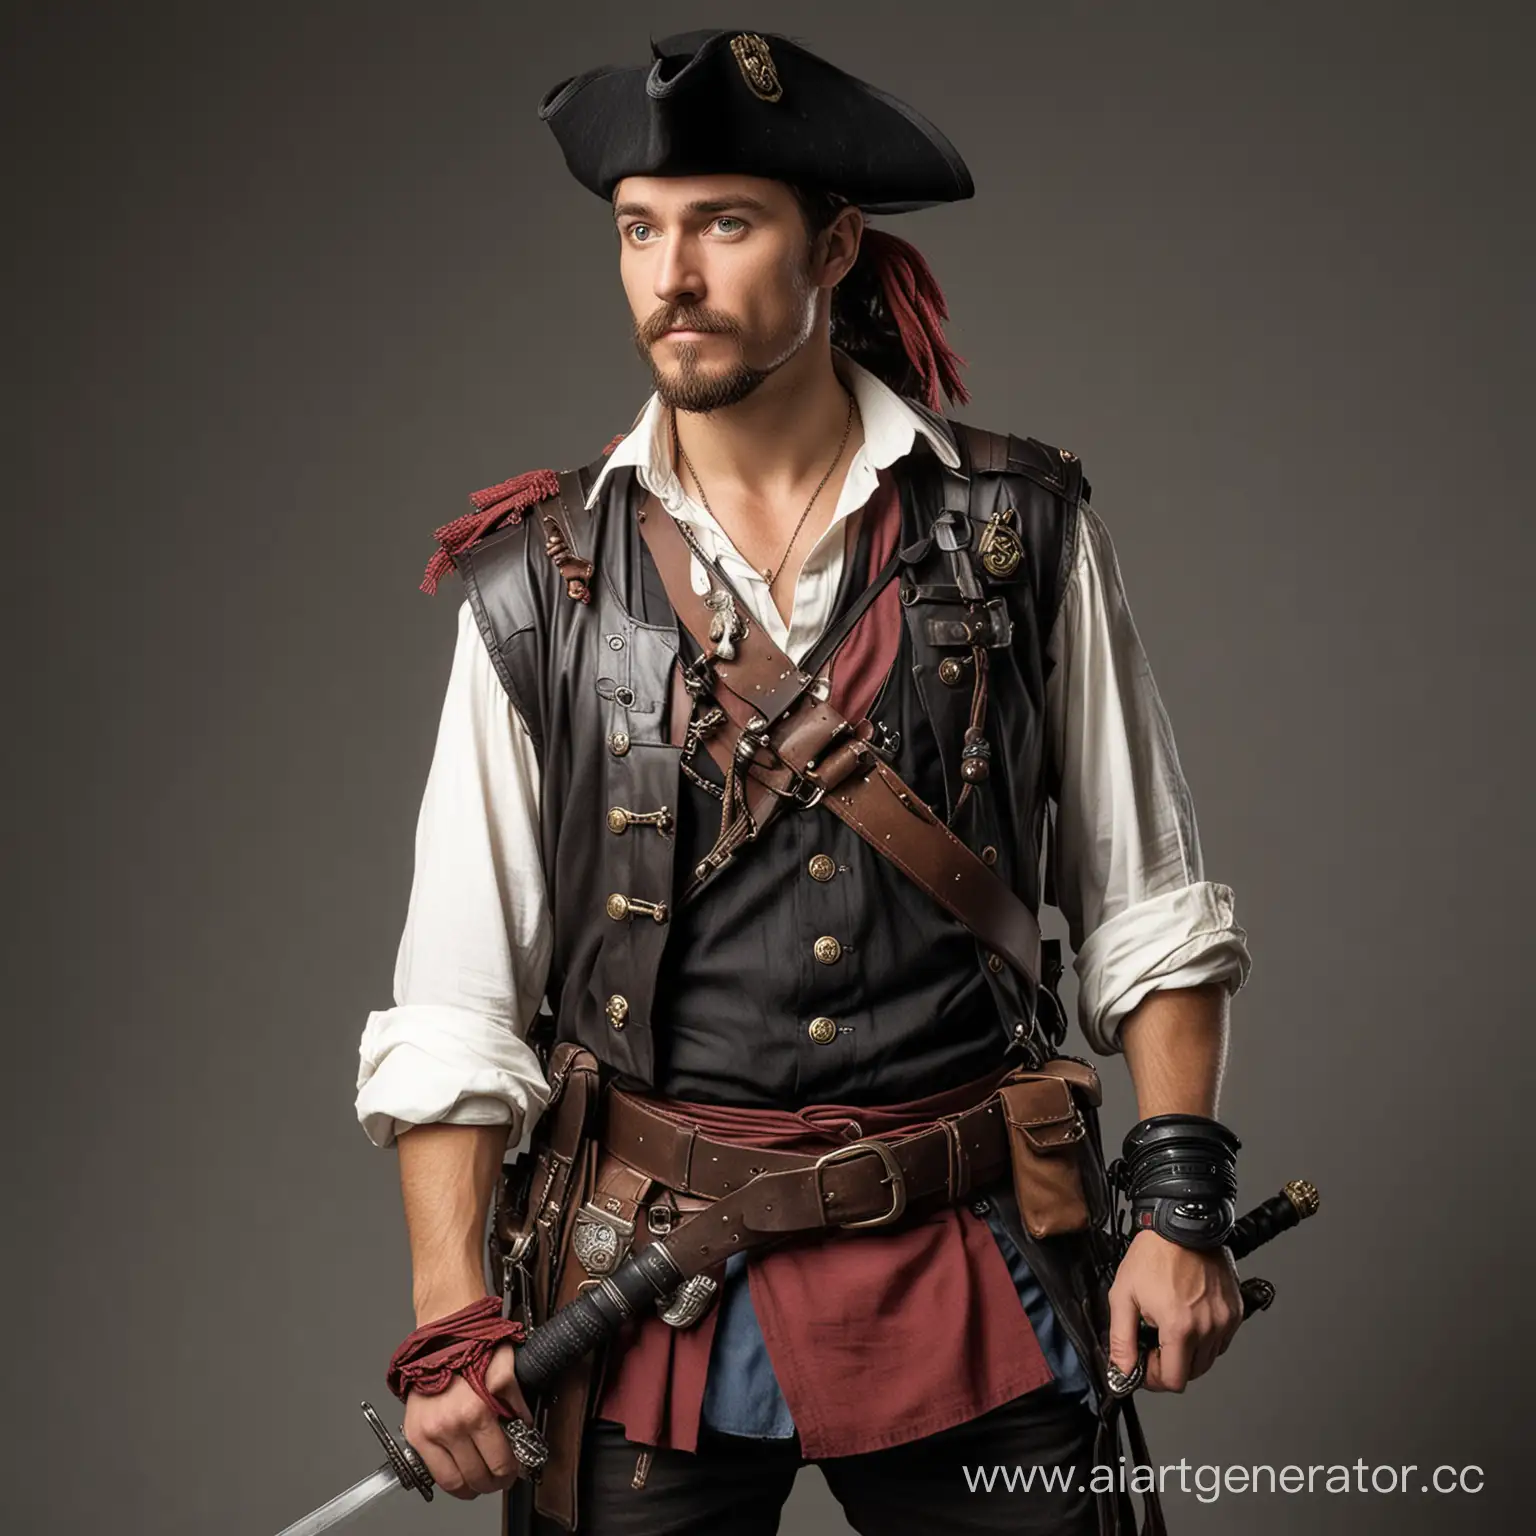 Pirate-Corsair-Photographer-with-Digital-Cameras-and-Sword